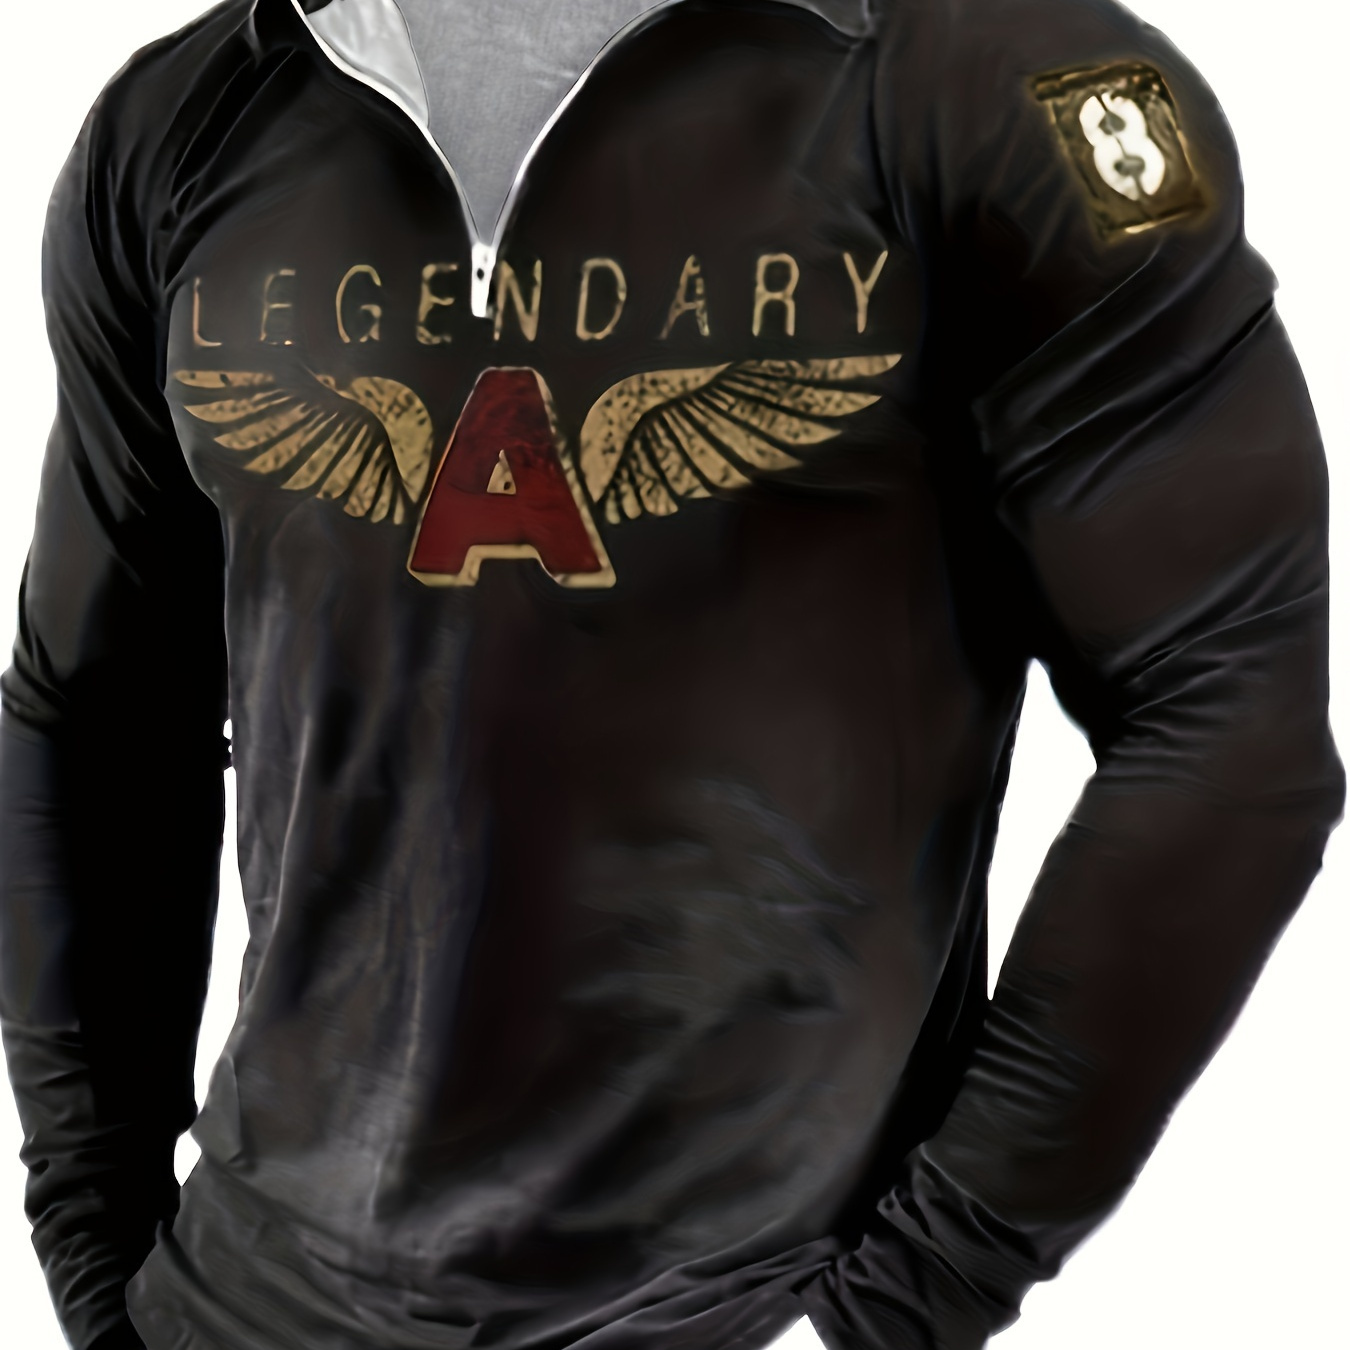 

Men's Long Sleeve Zip Up Lapel Shirt, Casual Style Trendy Print With Car Badge Wings, Fashionable Top